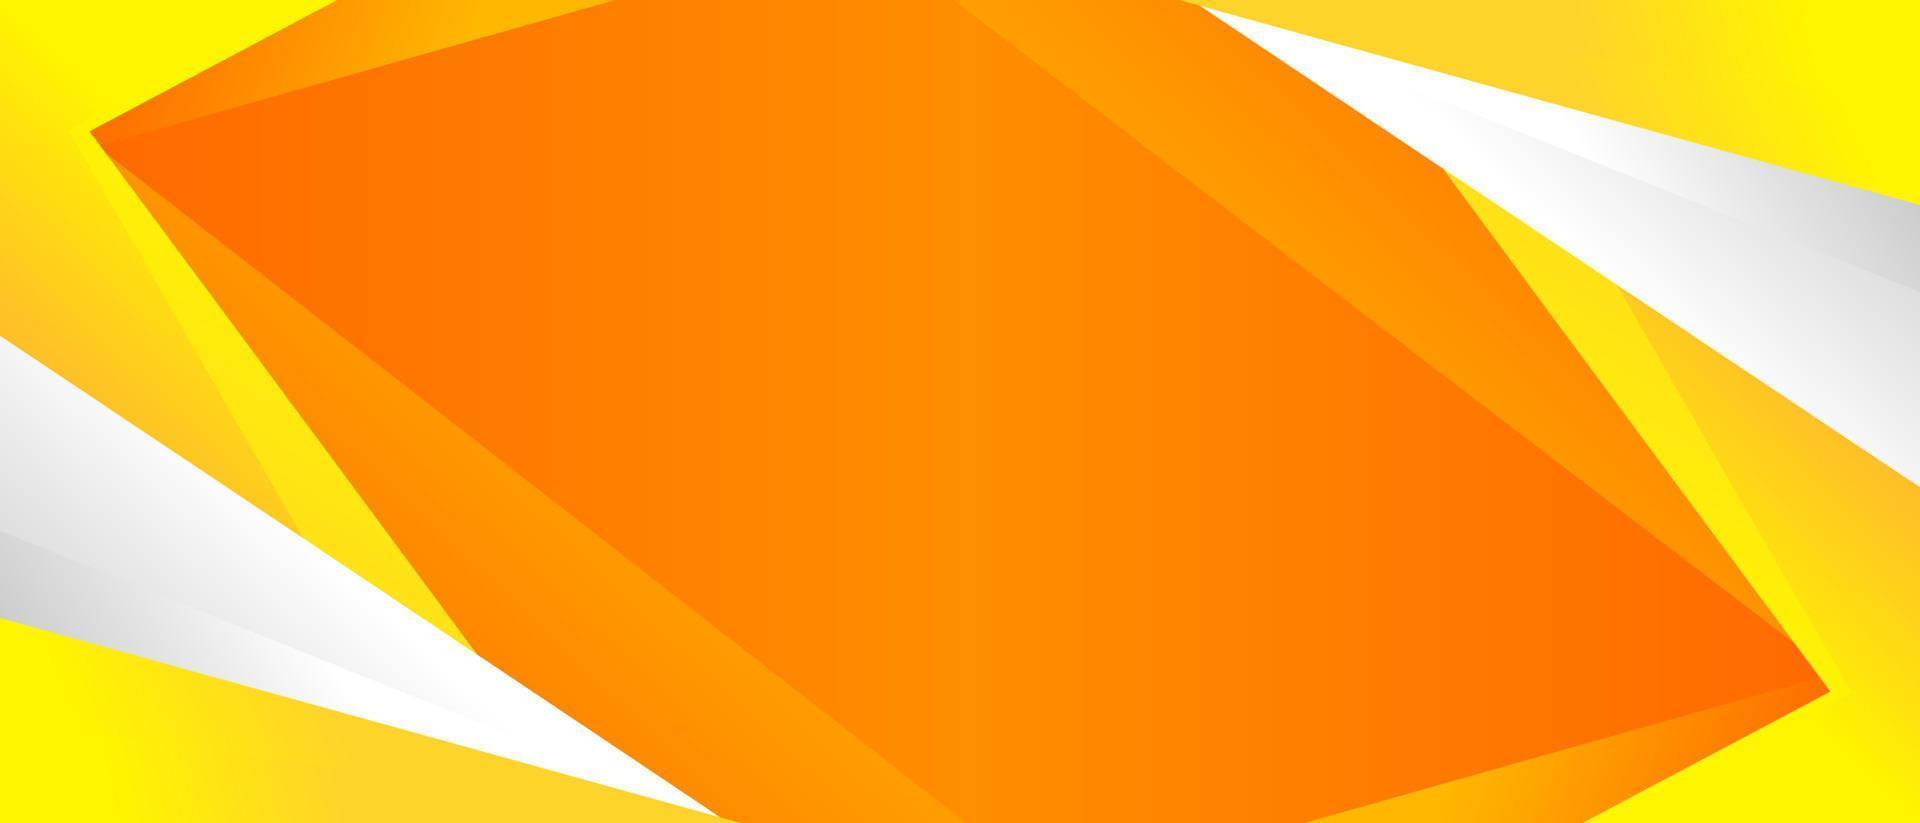 orange with yellow abstract background vector